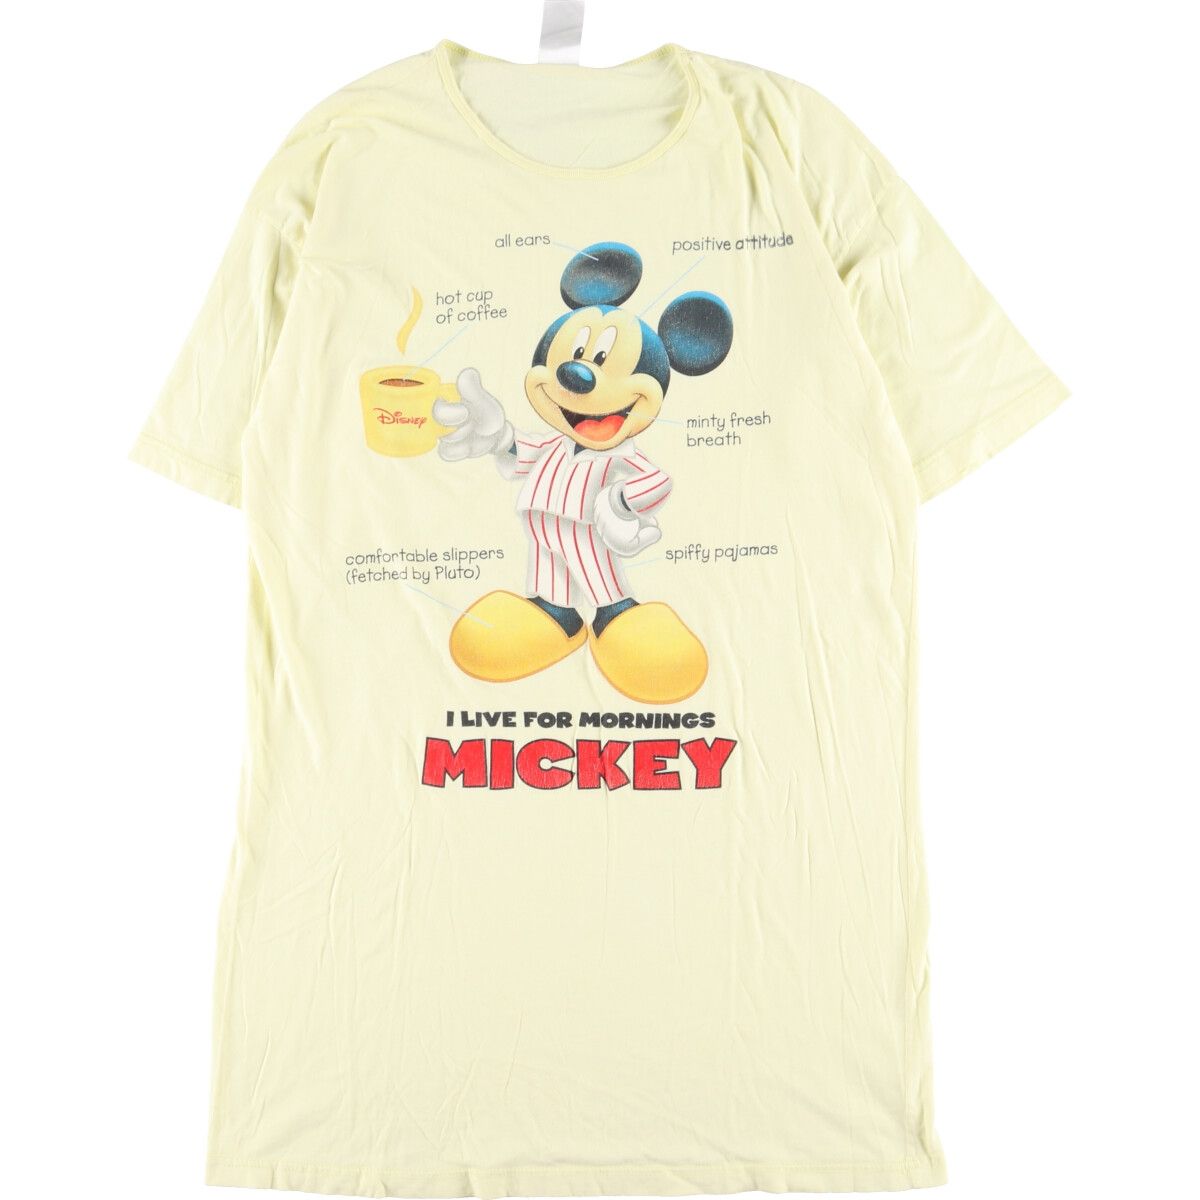 64cm肩幅MICKEY UNLIMITED MICKEY MOUSE ミッキーマウス キャラクタープリントTシャツ メンズXL /eaa341066